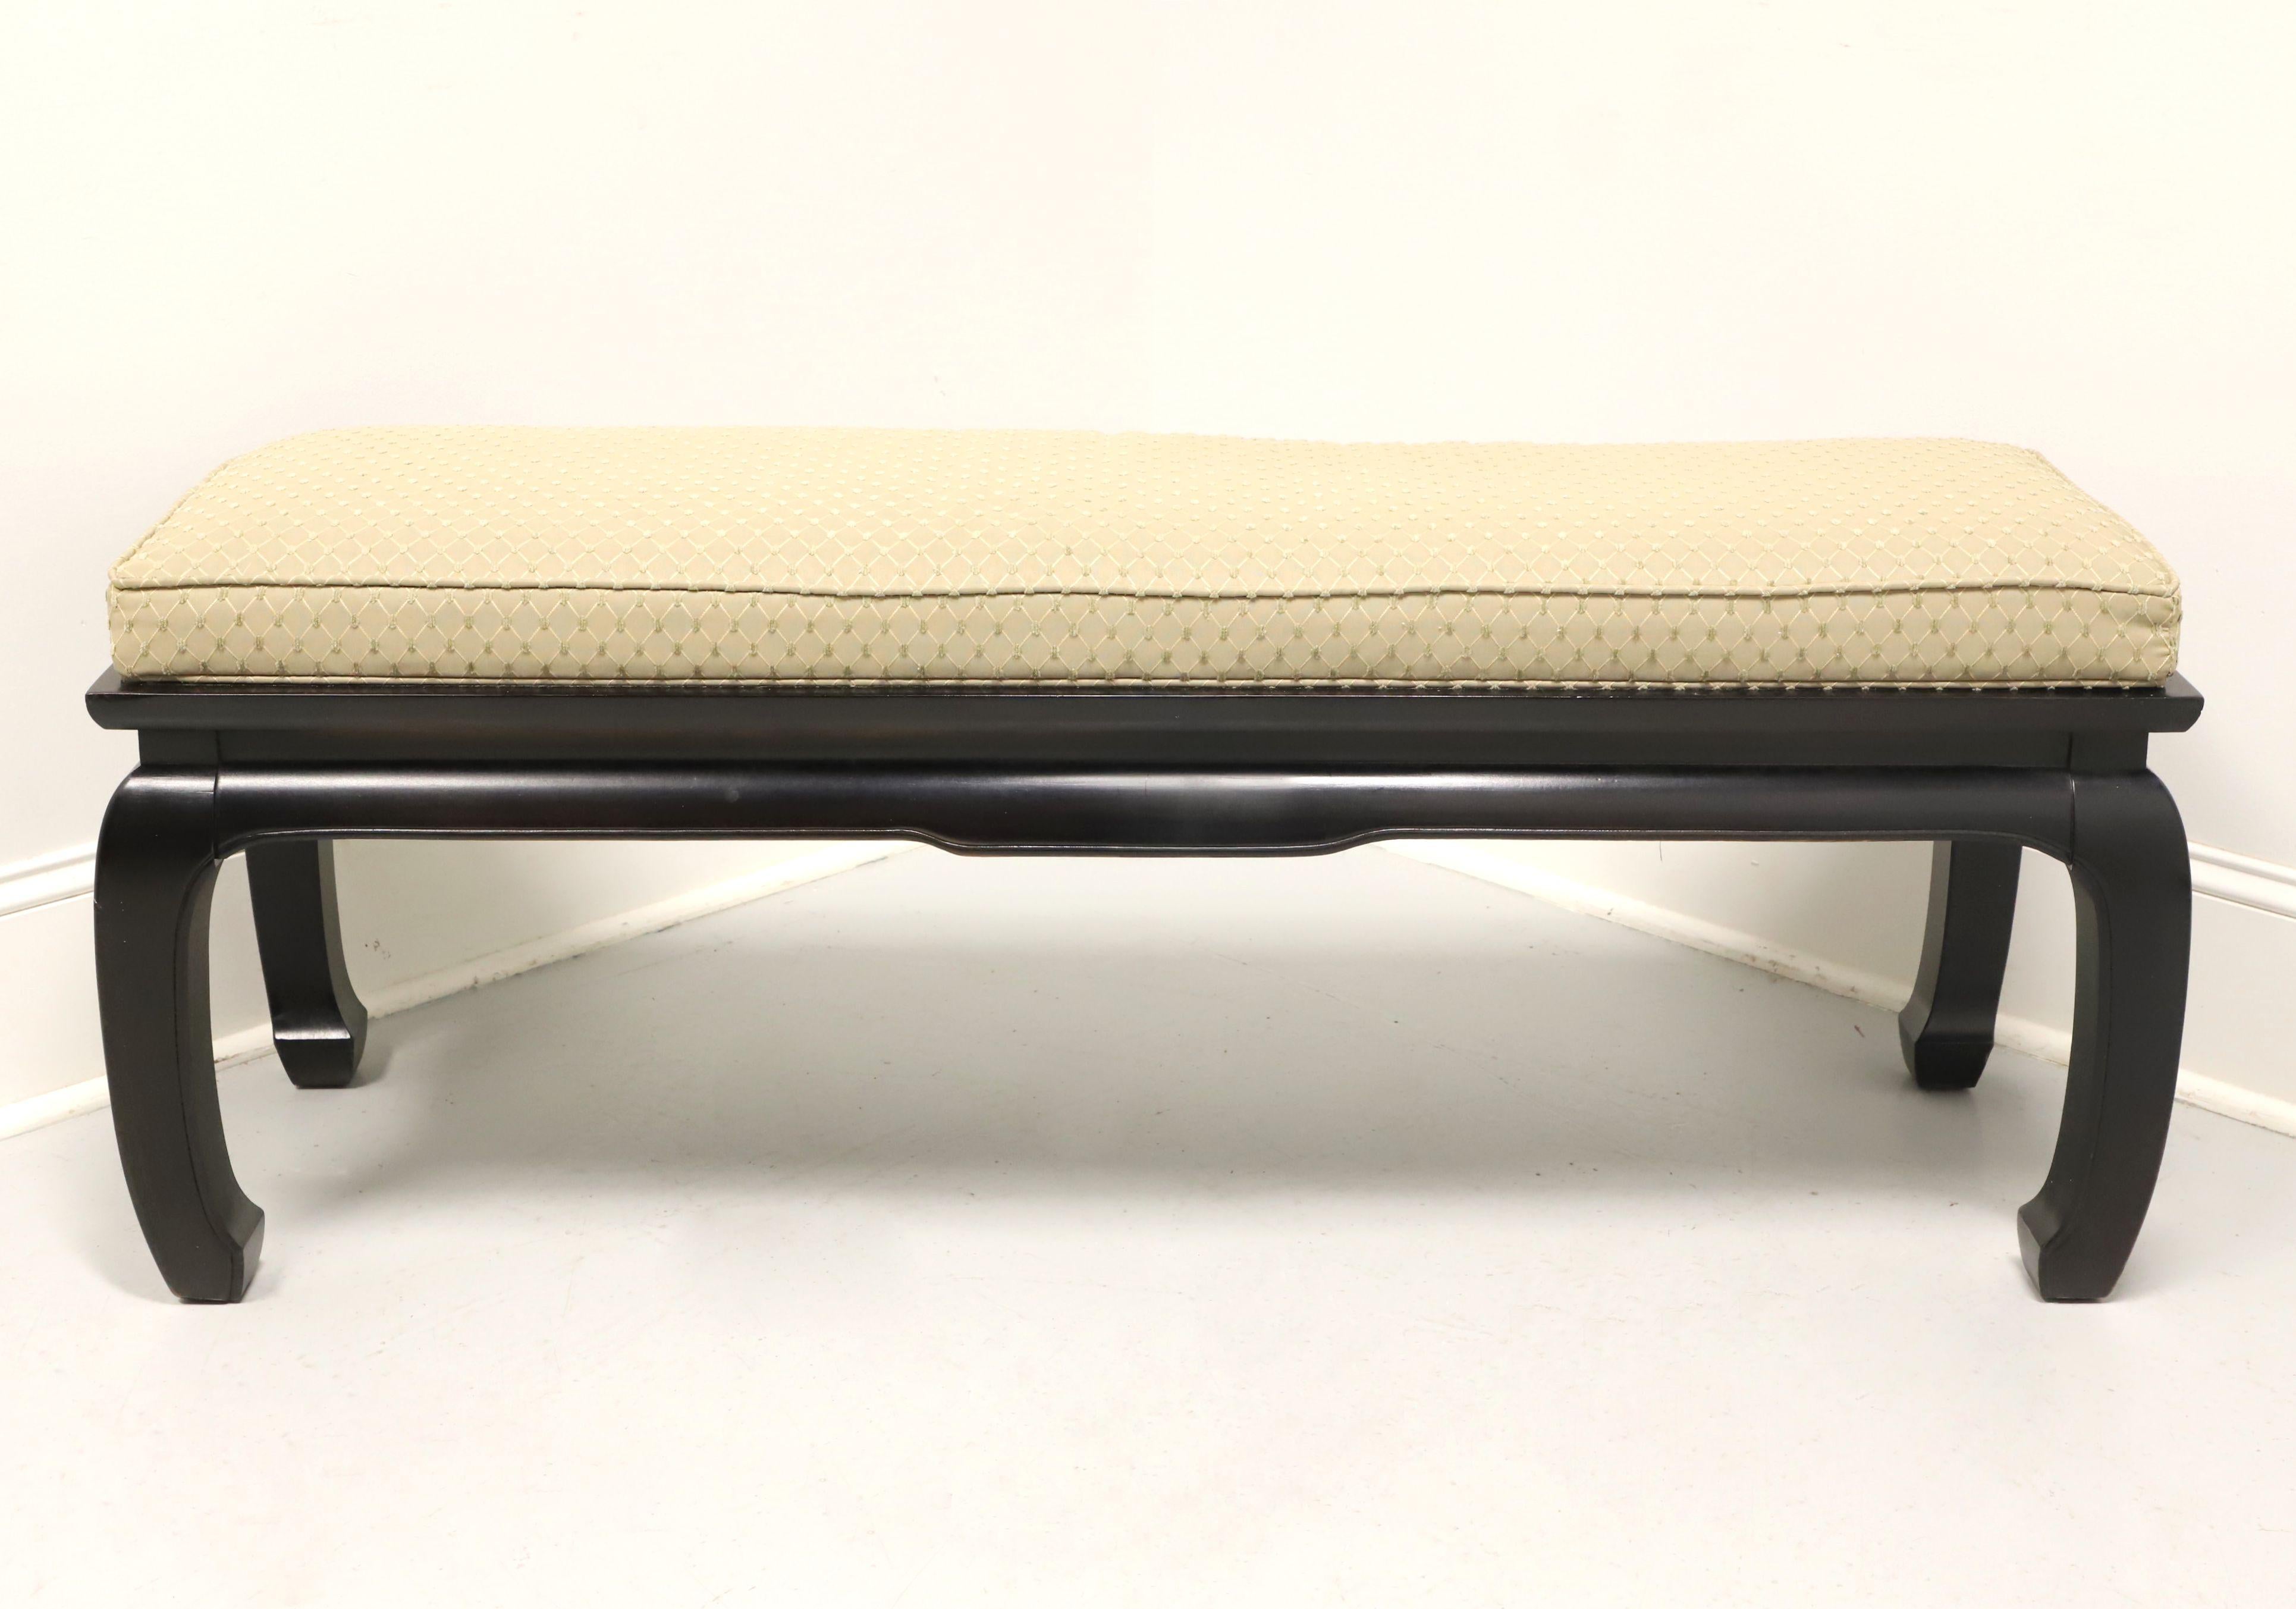 An Asian influenced bench by top-quality furniture maker Century Furniture, from their 